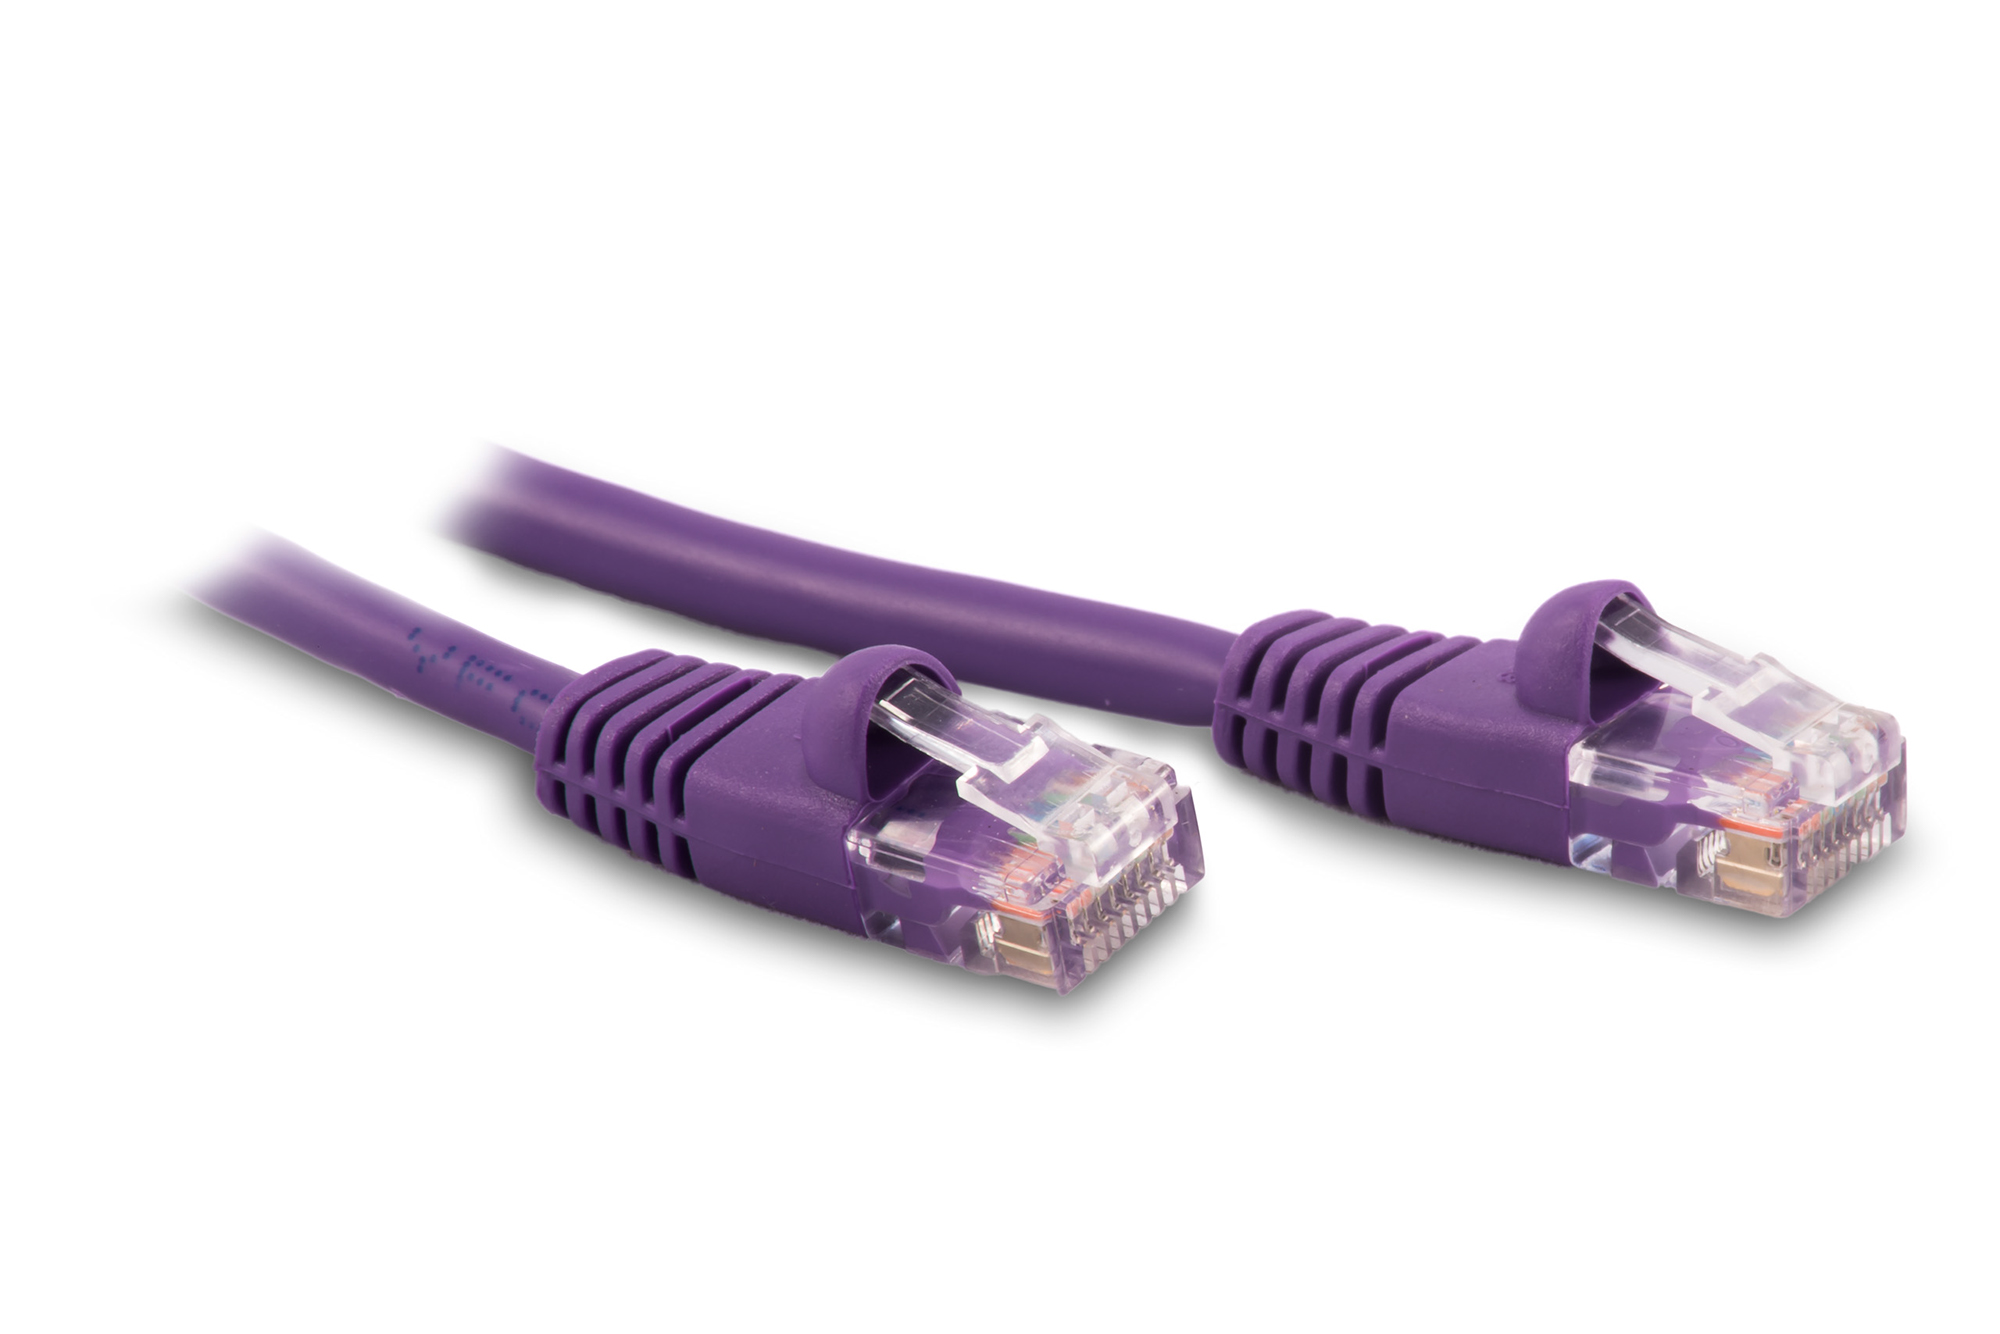 75ft Cat5e Ethernet Patch Cable - Violet Color - Snagless Boot